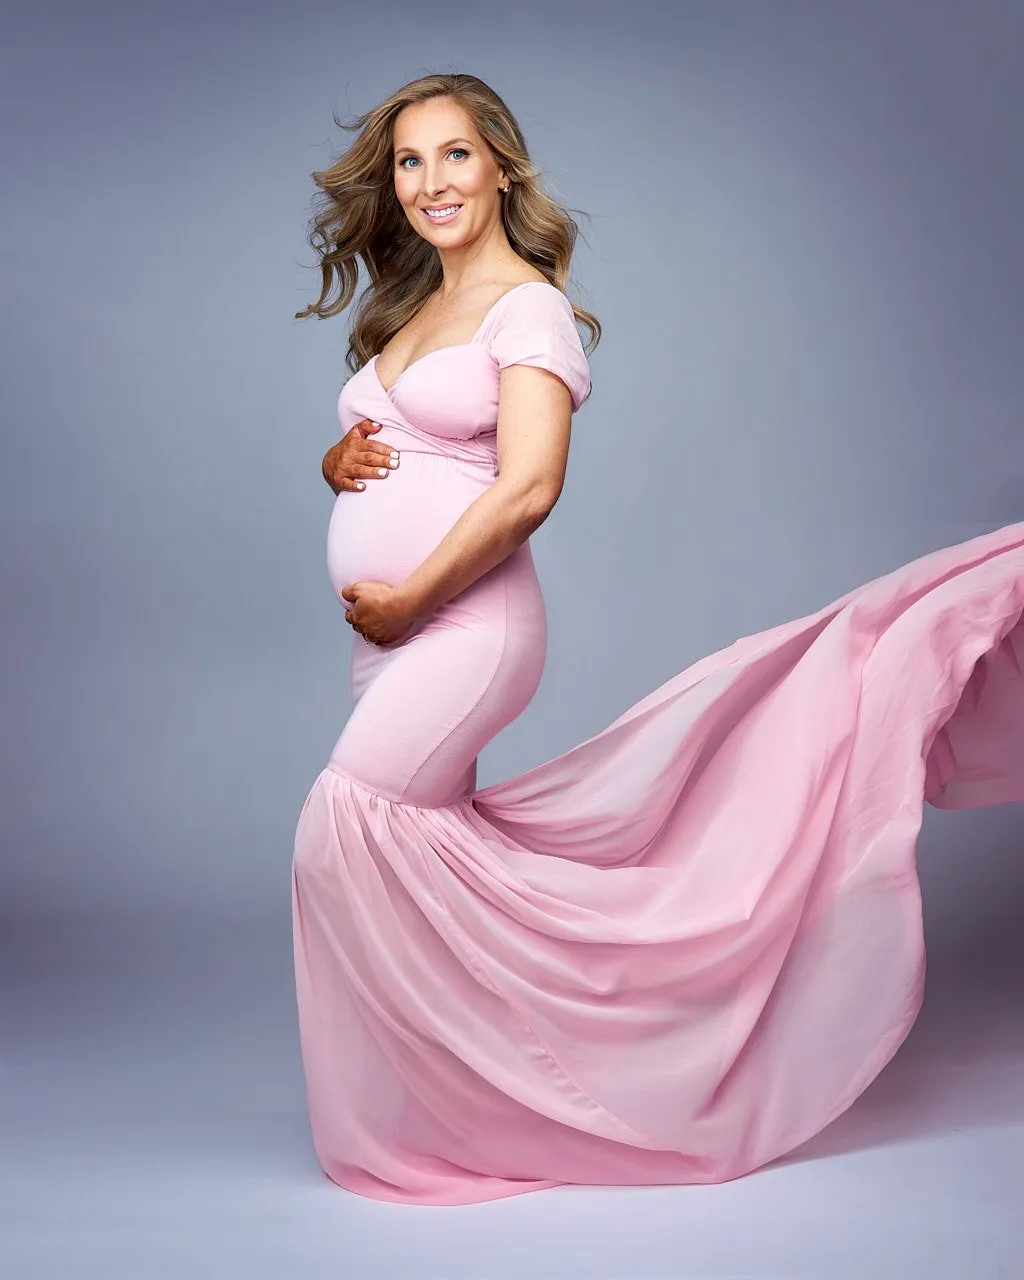 Maternity Photo | Maternity Photoshot | White  pregnant woman in flowing pink dress and flowing blond hair | Washington DC 